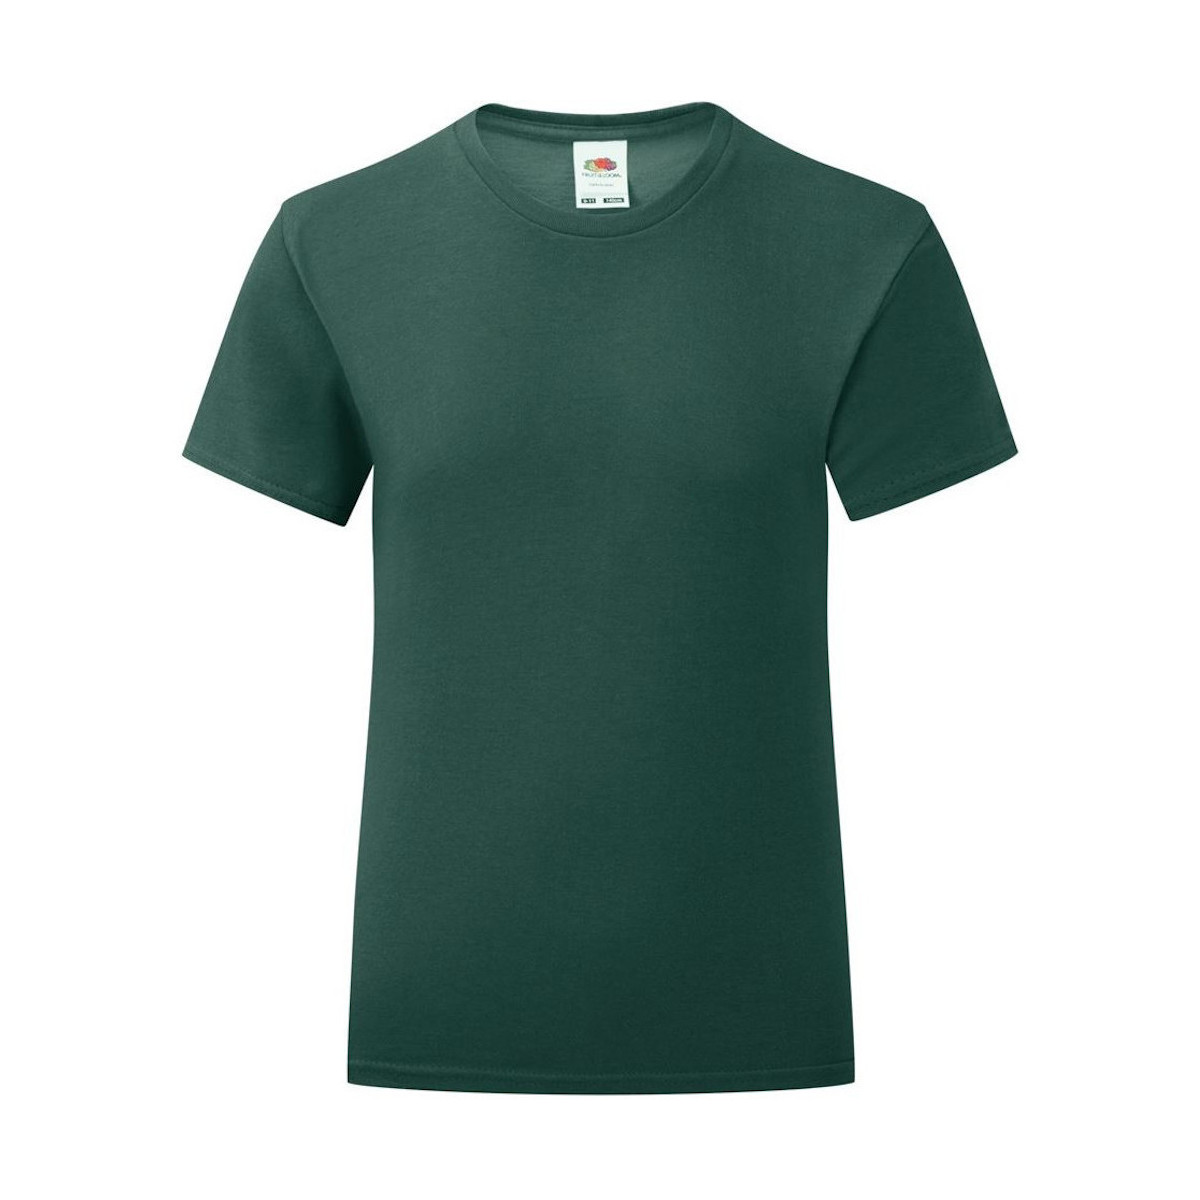 Vêtements Fille T-shirts manches longues Fruit Of The Loom Iconic Vert